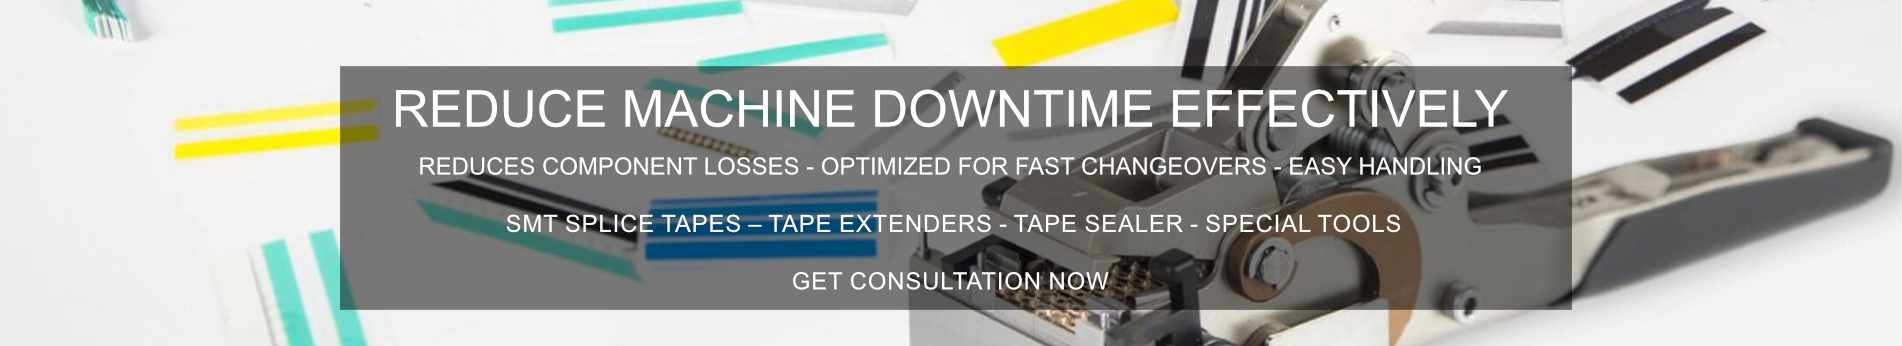 smt splice tapes - tape extenders - sealers - free consultation